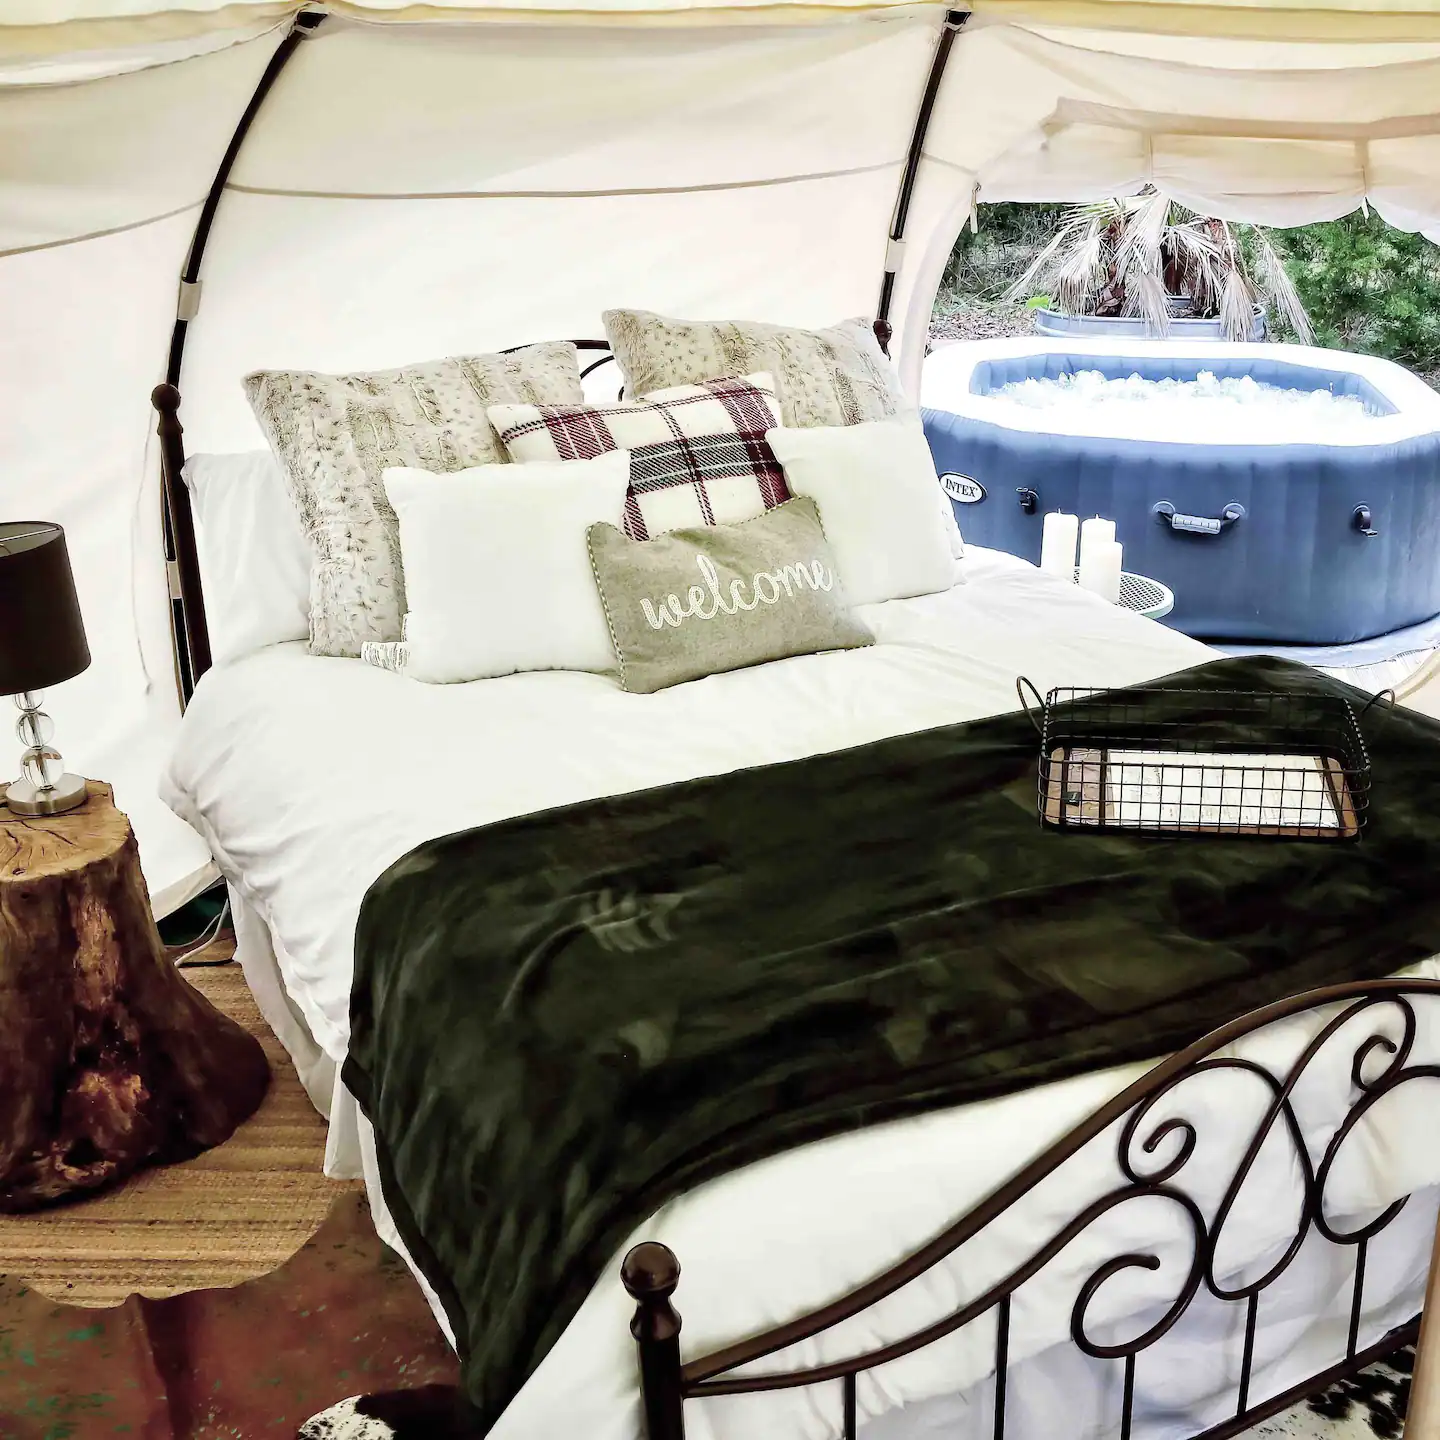 Glamping Lotus Tent with Hot Tub